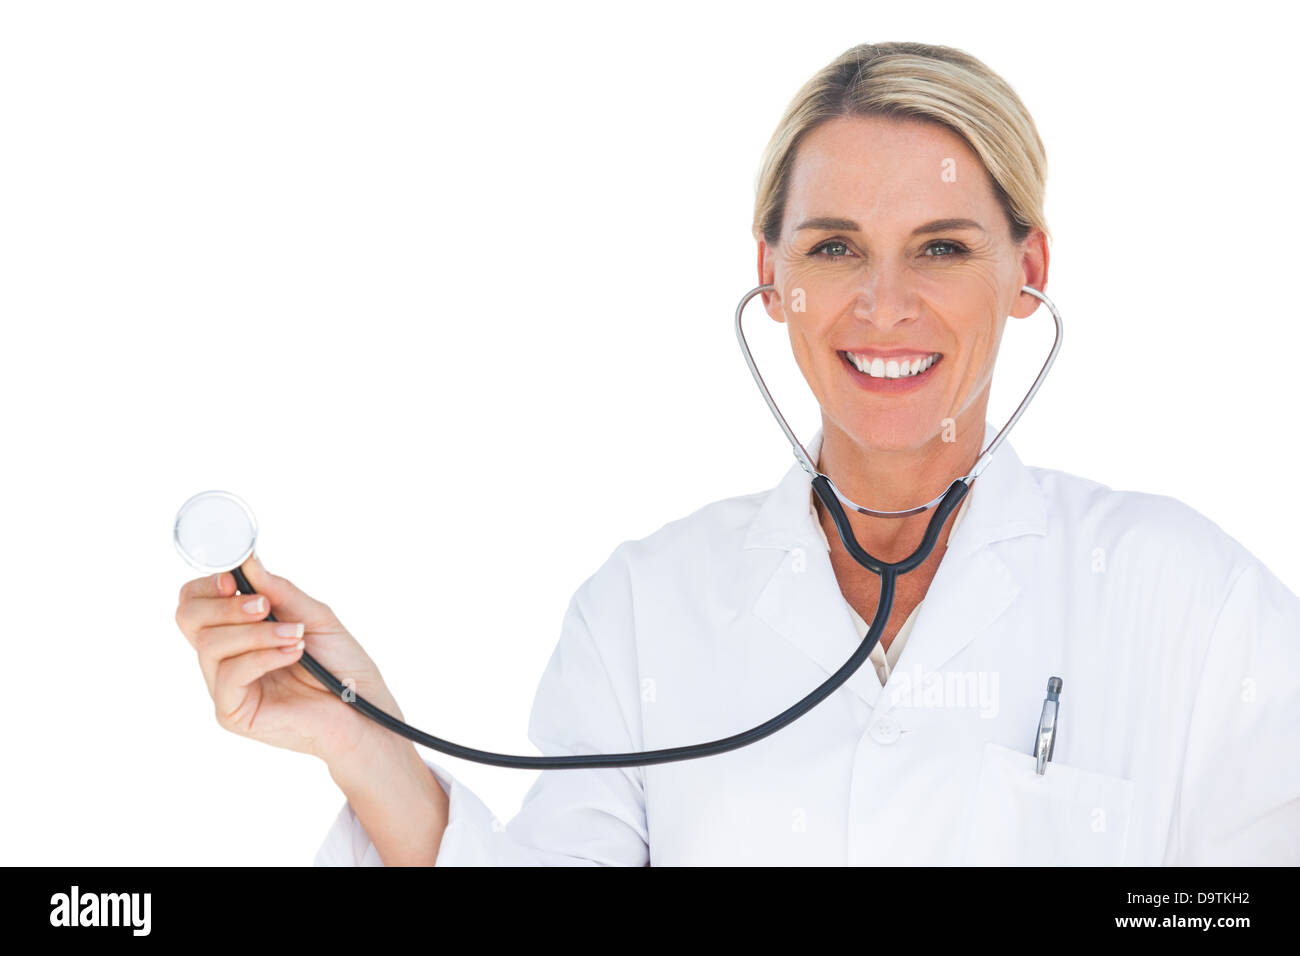 Doctor smiling with stethoscope Banque D'Images